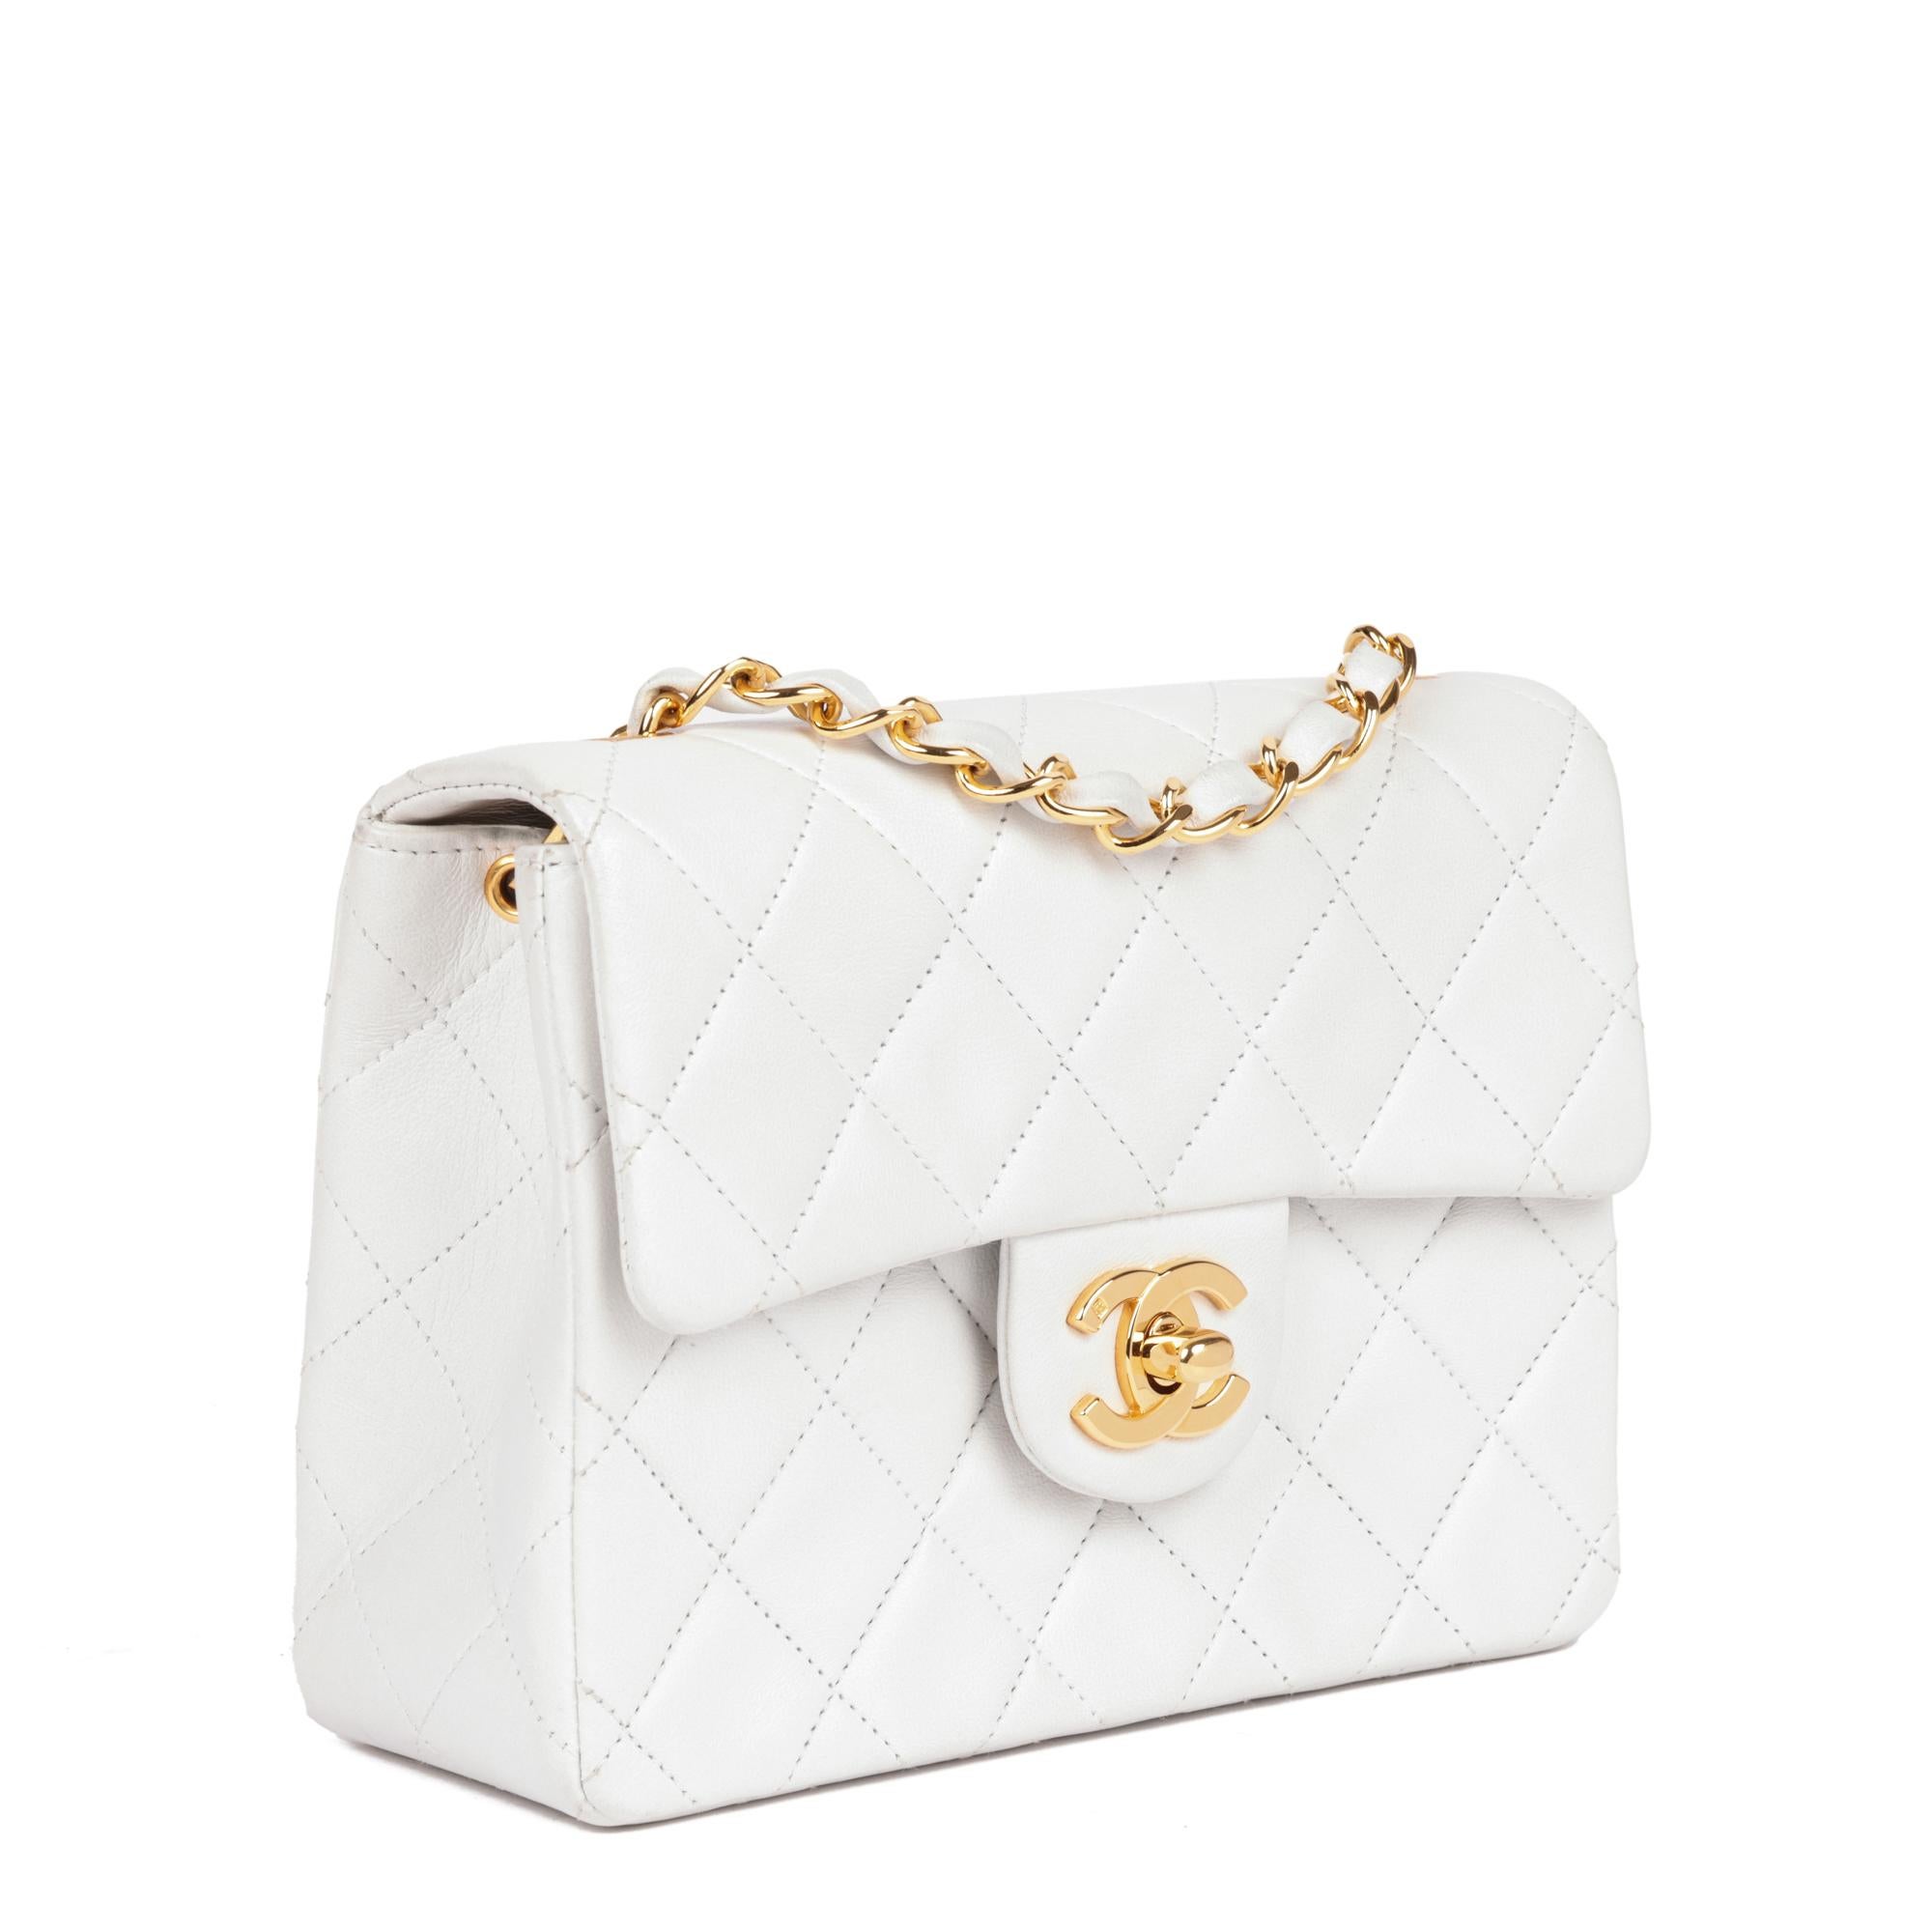 CHANEL
White Quilted Lambskin Vintage Square Mini Flap Bag

Serial Number: 2070237
Age (Circa): 1993
Accompanied By: Chanel Dust Bag
Authenticity Details: Serial Sticker (Made in France)
Gender: Ladies
Type: Shoulder, Crossbody

Colour: